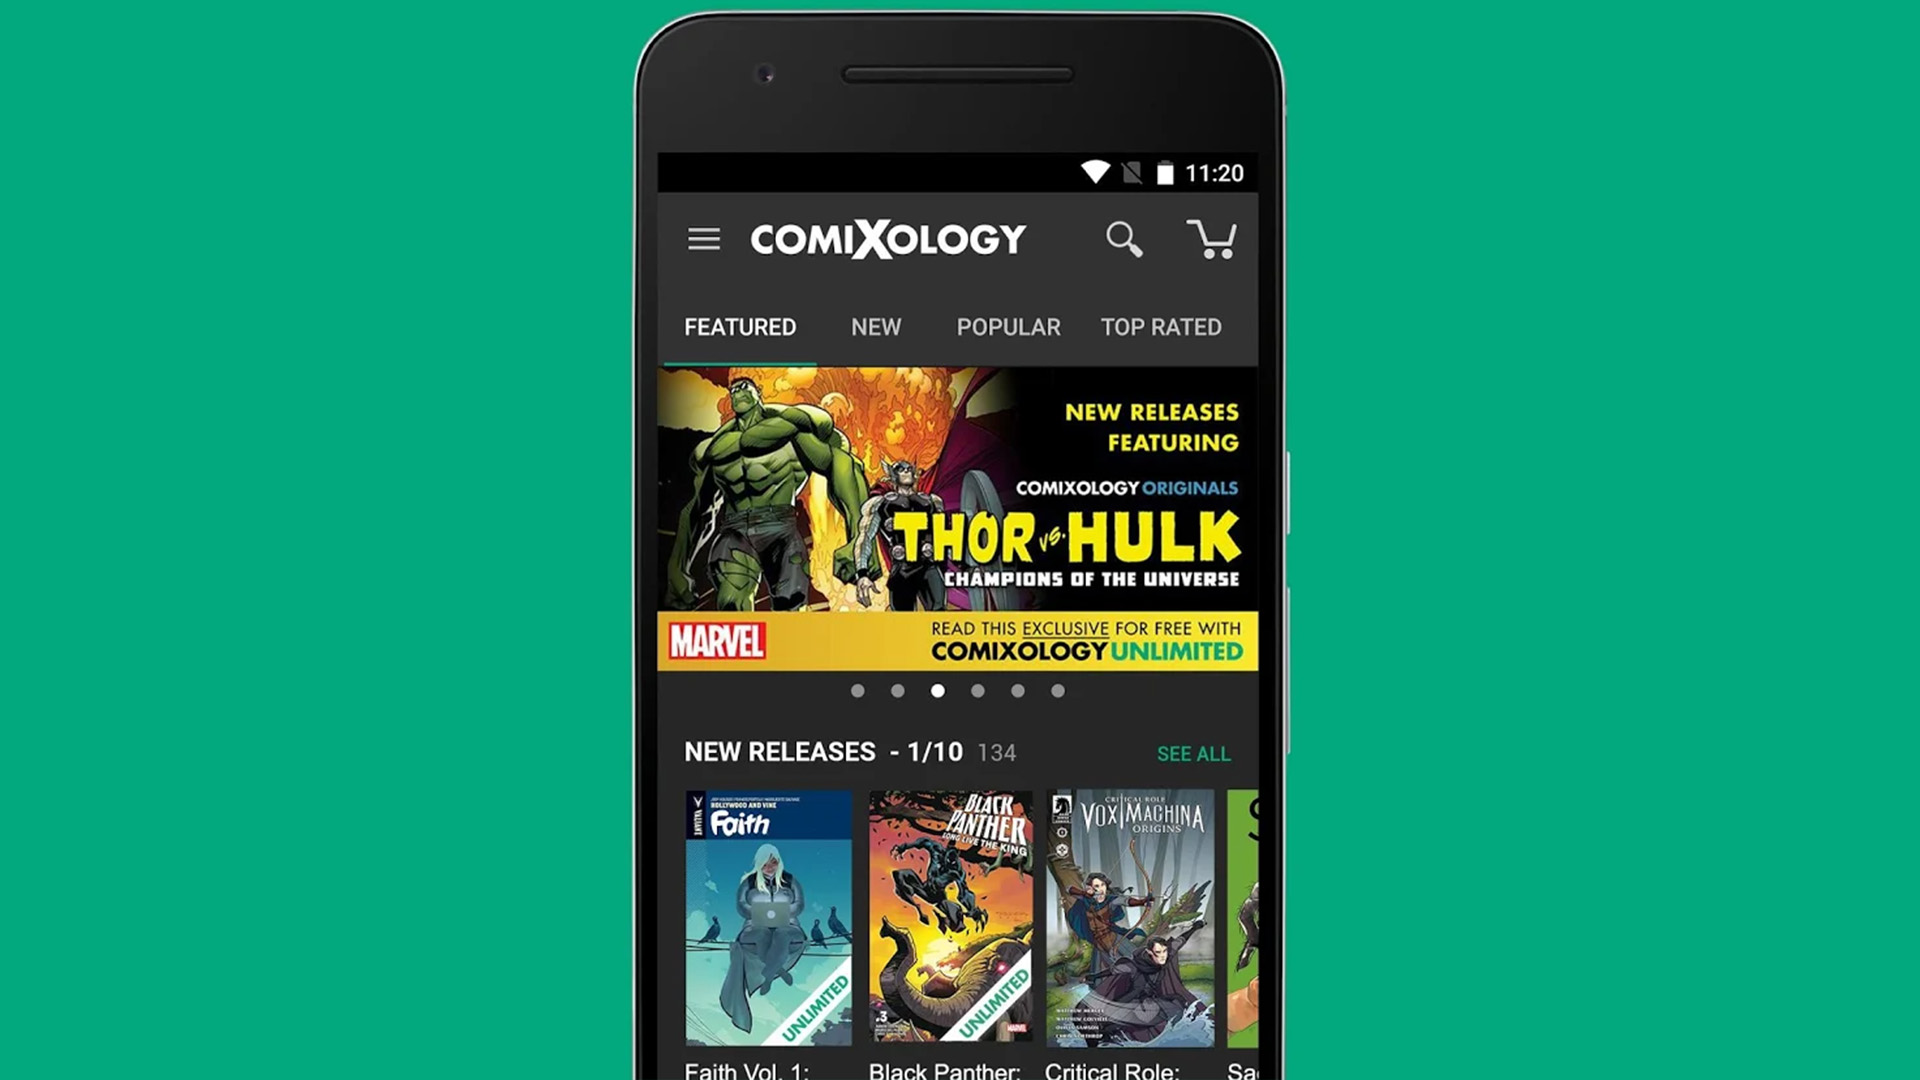 Comixology best comic book apps and readers for Android